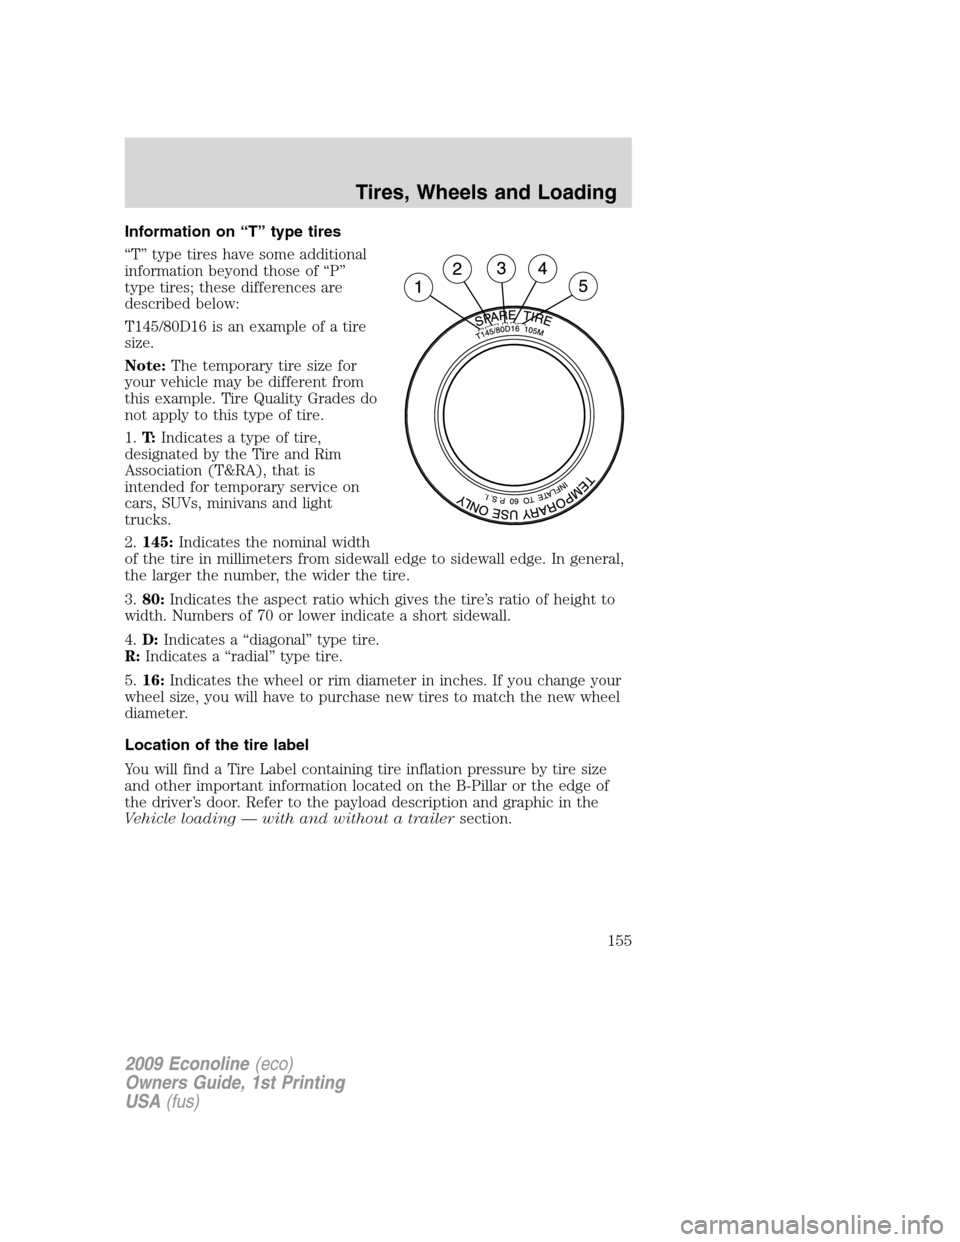 FORD E SERIES 2009 4.G Owners Manual Information on “T” type tires
“T” type tires have some additional
information beyond those of “P”
type tires; these differences are
described below:
T145/80D16 is an example of a tire
size